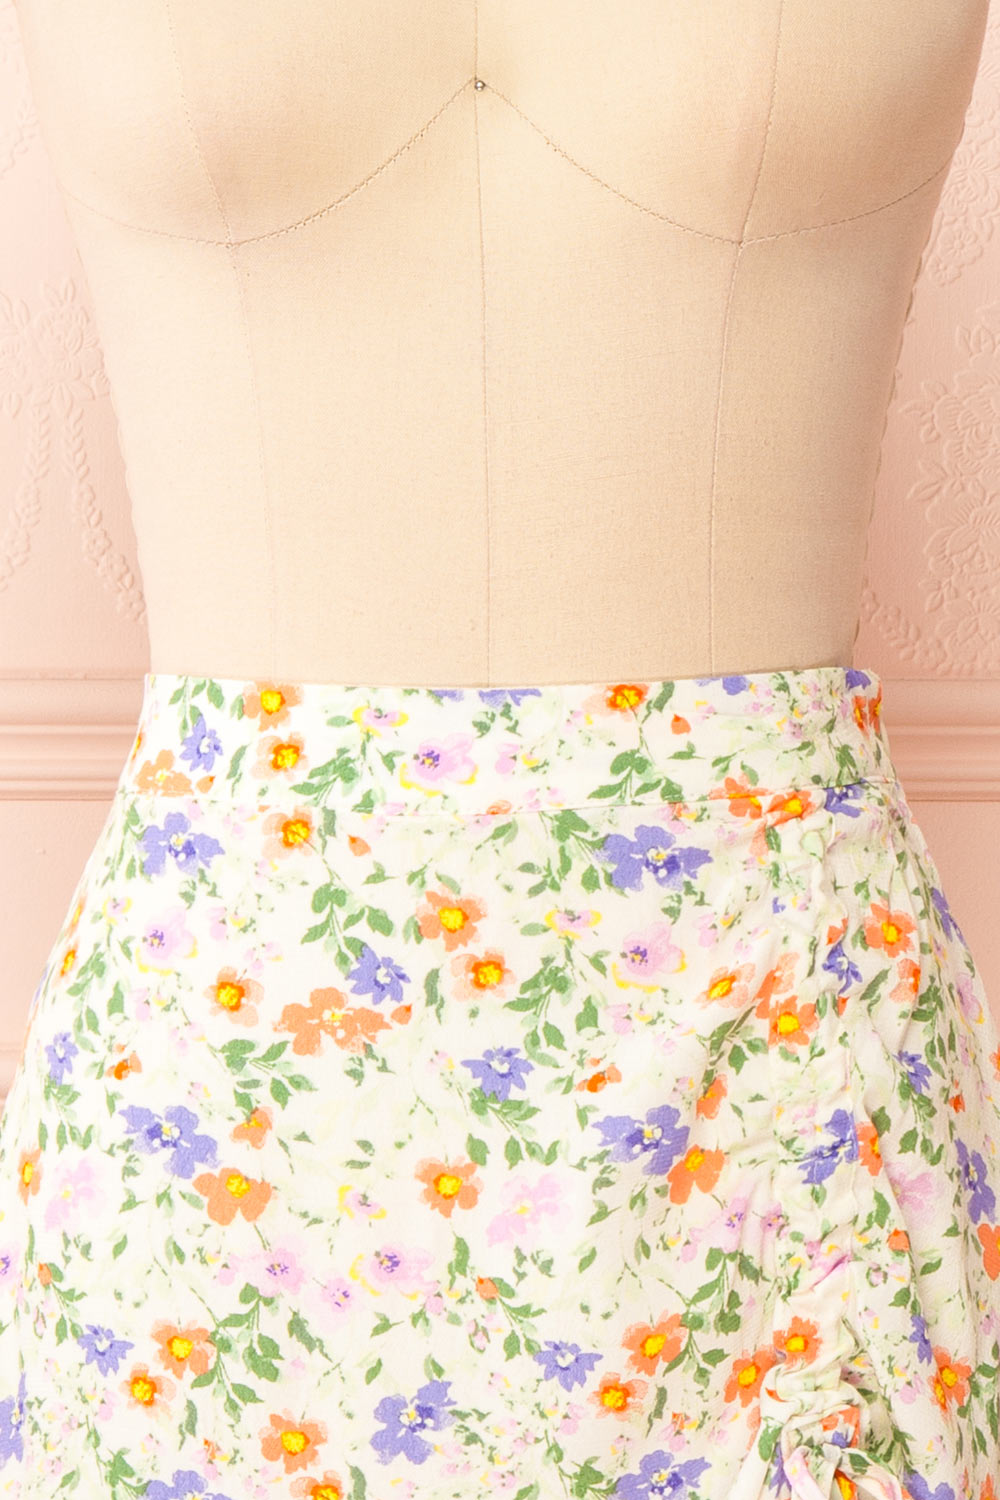 Svaana Midi Floral Skirt w/ Drawstring | Boutique 1861 front close-up